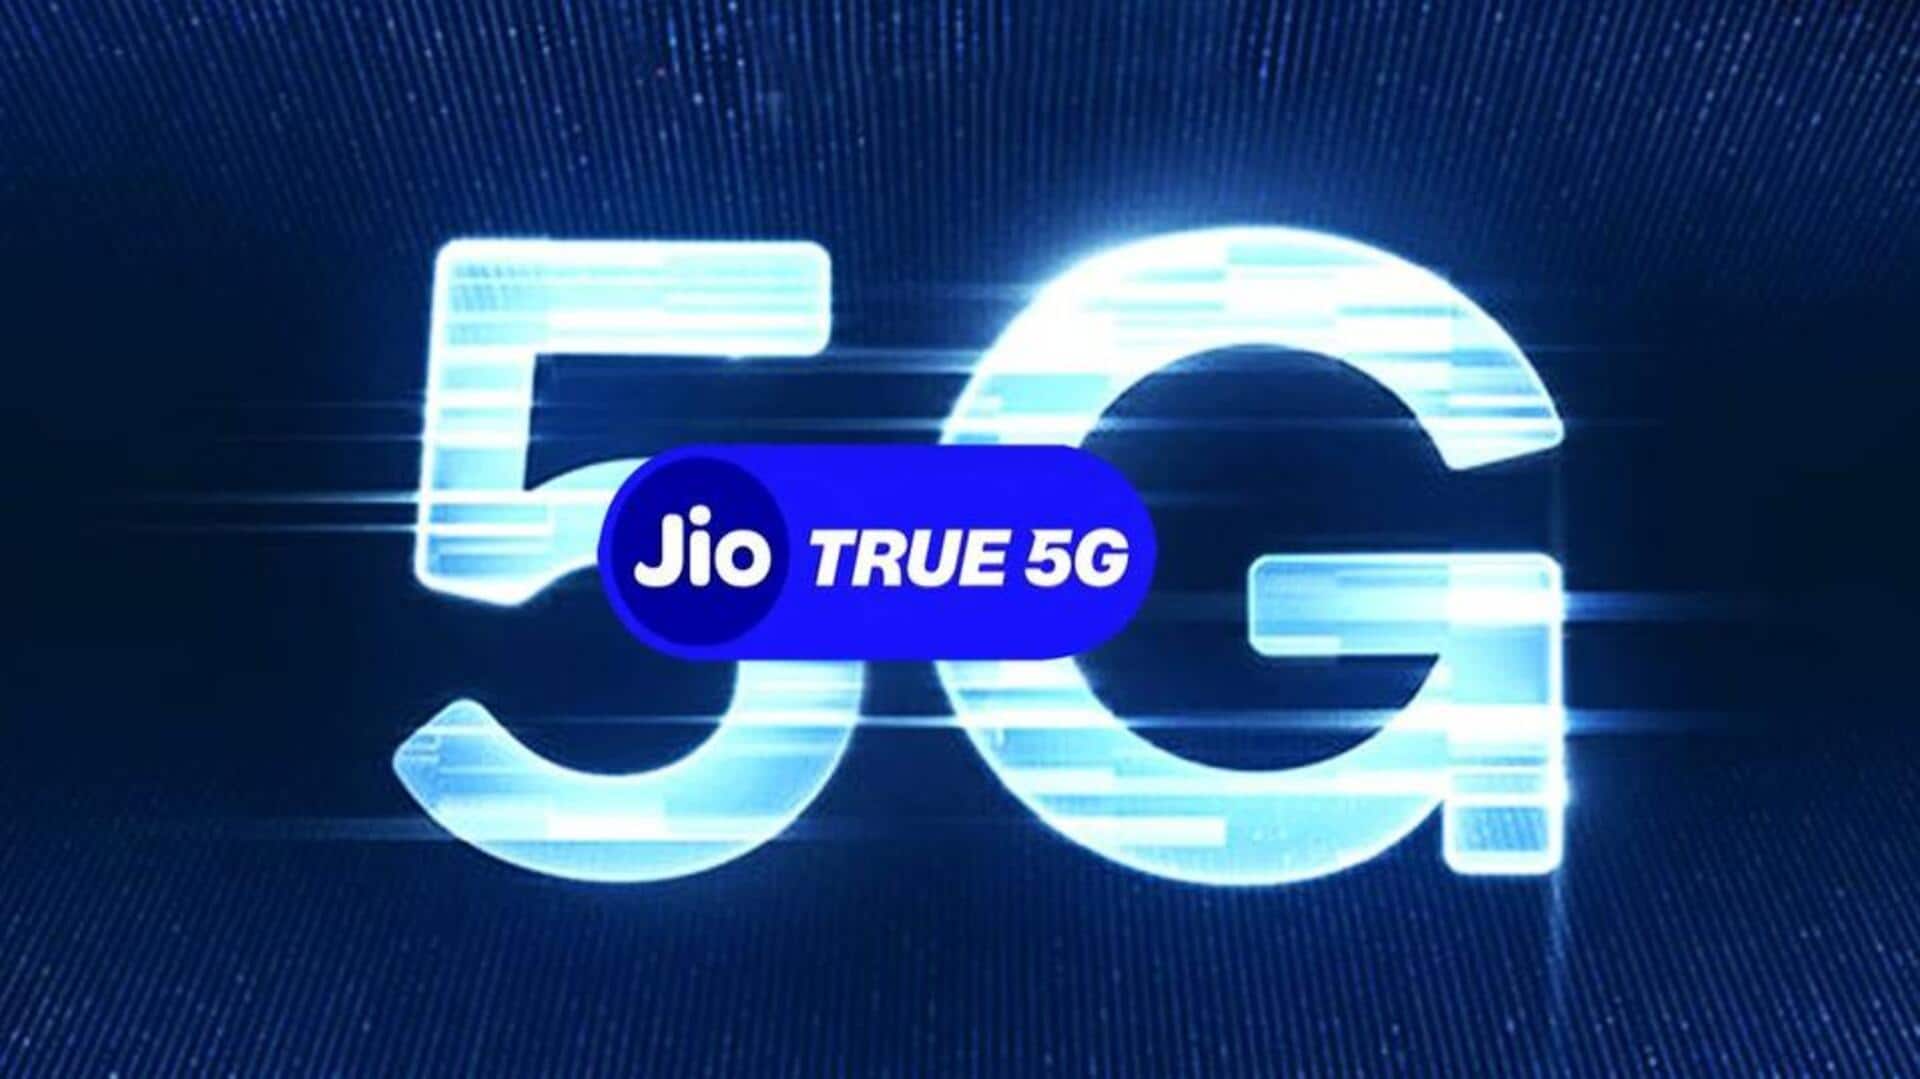 Jio completes 5G rollout across all spectrum bands